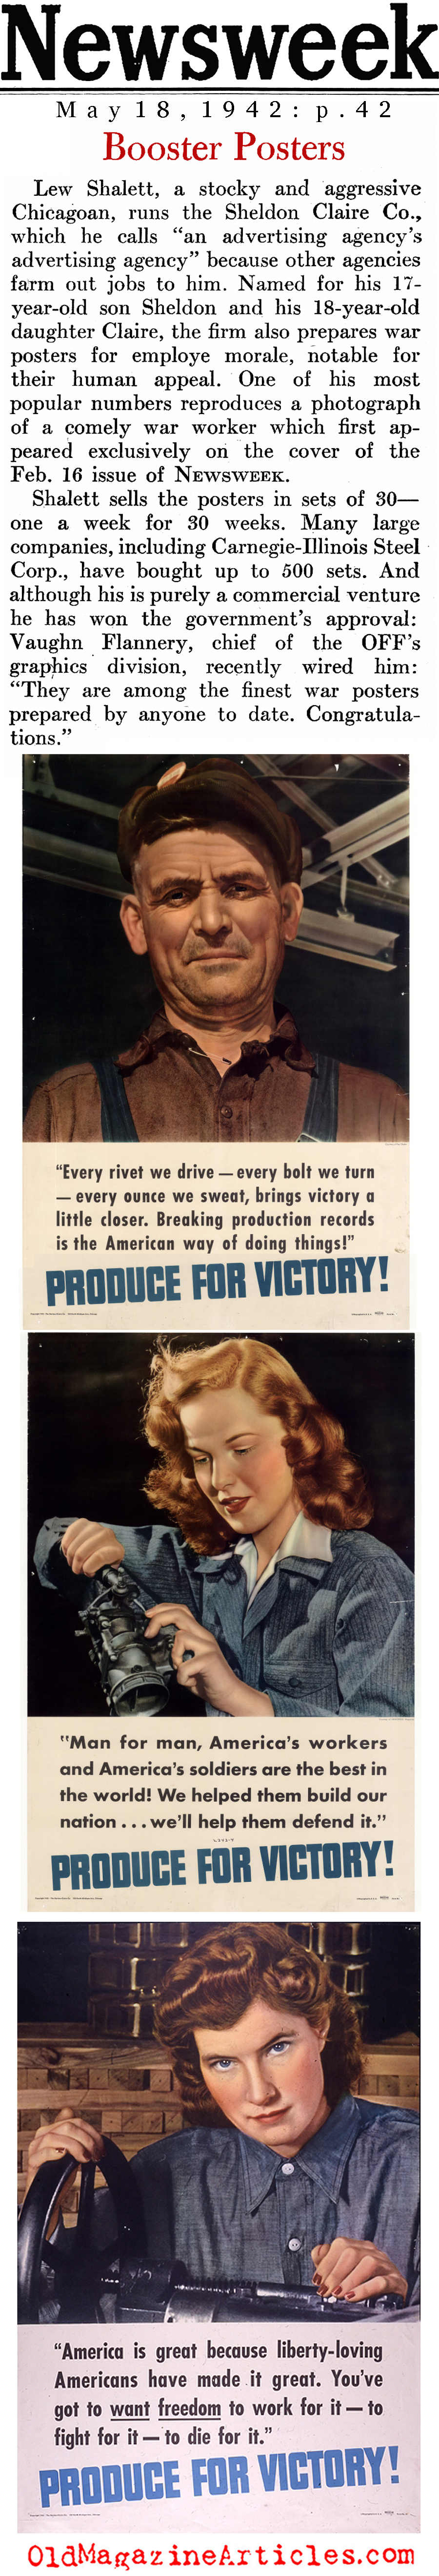 Posters For Encouragement (Newsweek Magazine, 1942) 